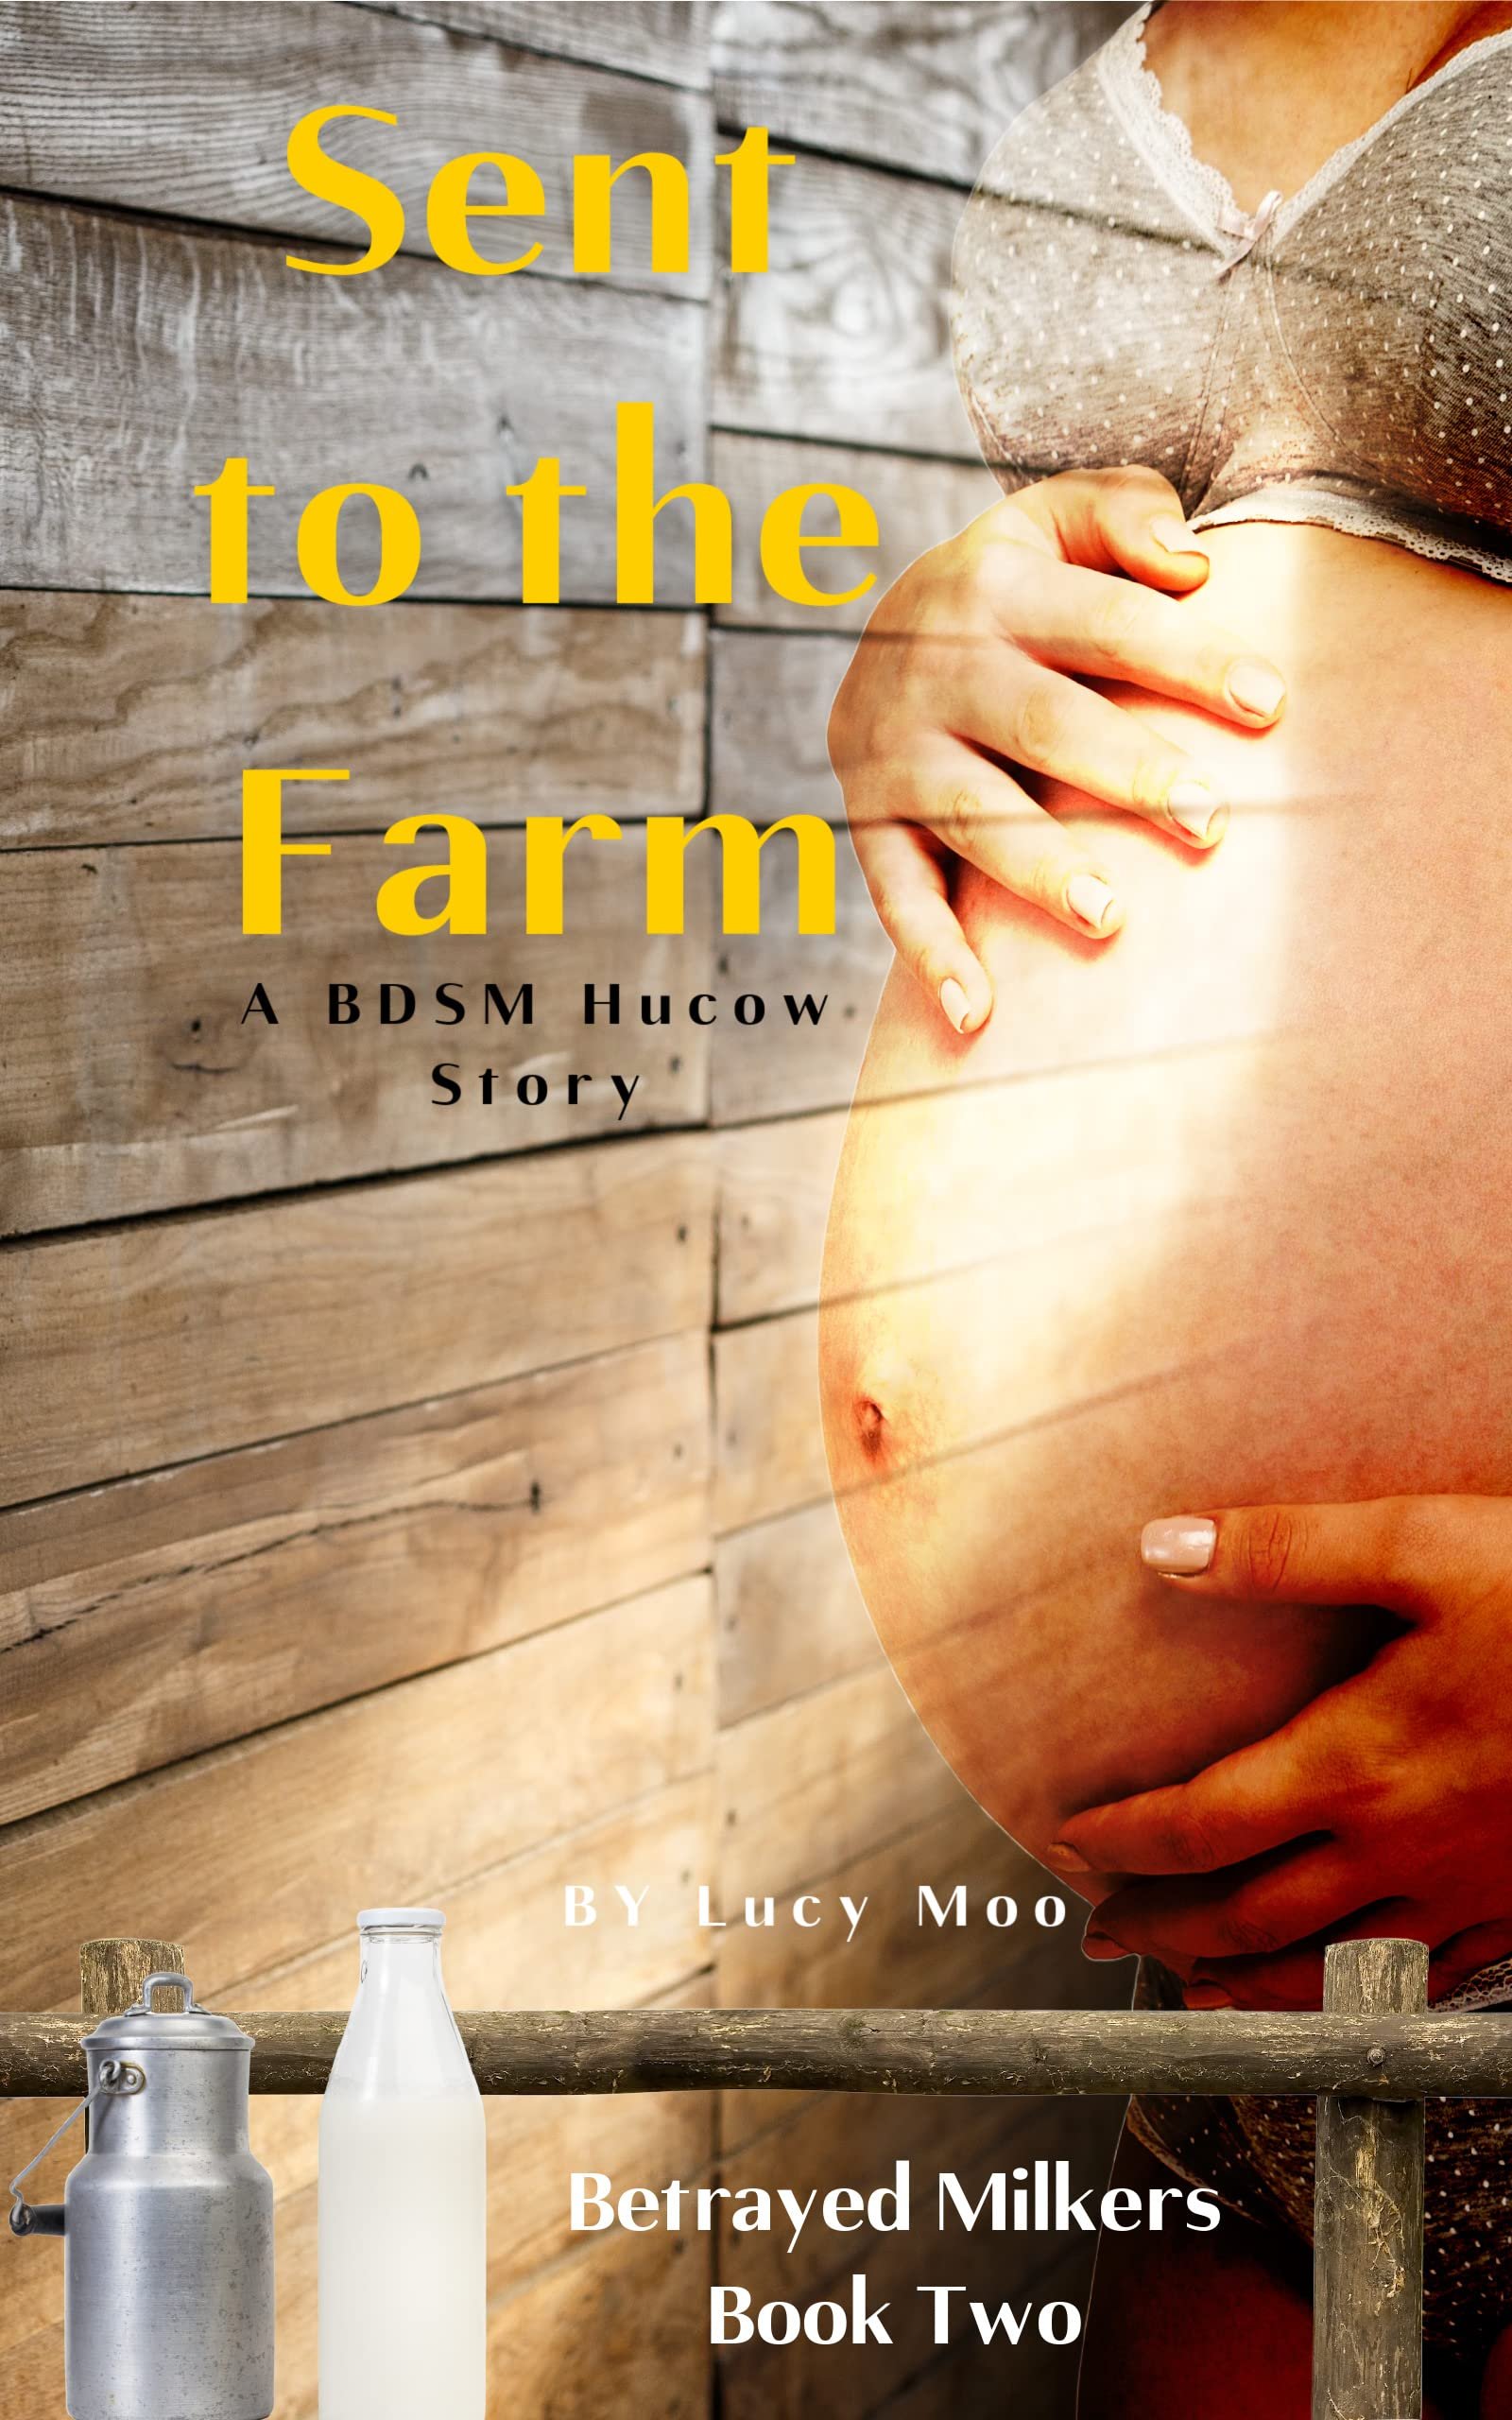 Sent to the Farm: A BDSM Hucow Story (Betrayed Milkers Book 2) Cover